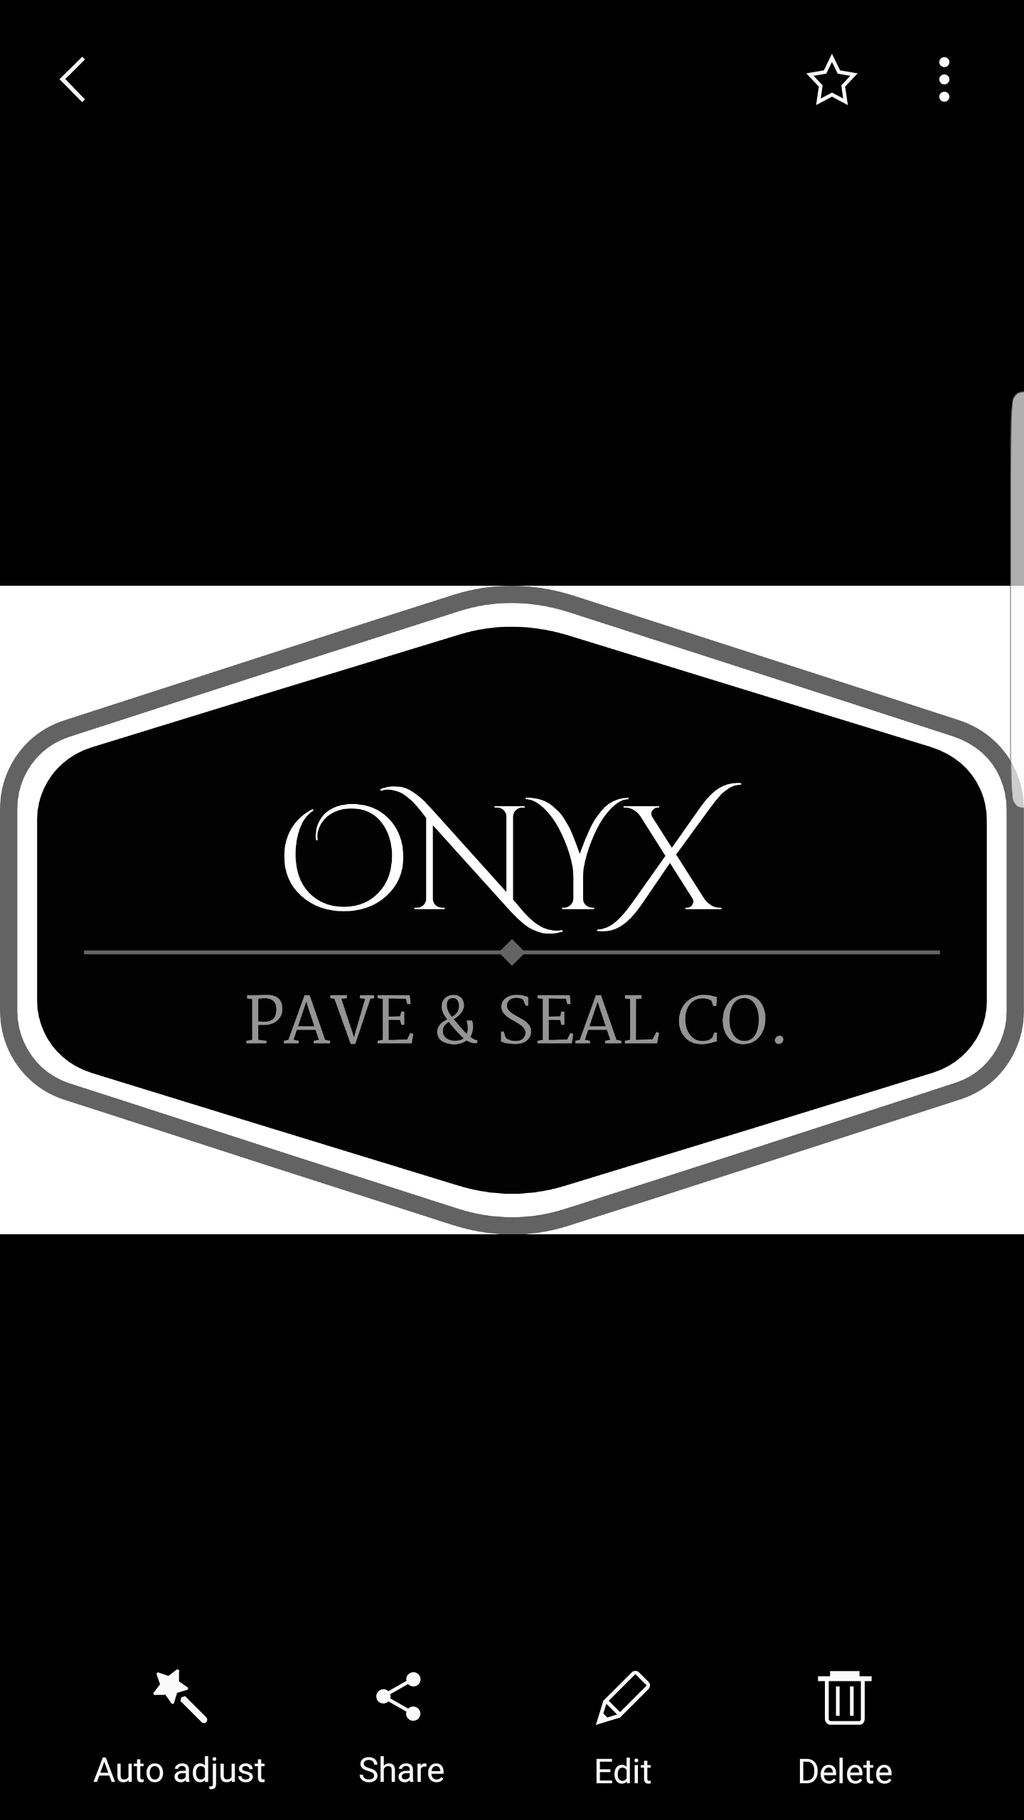 ONYX Pave & Seal Co